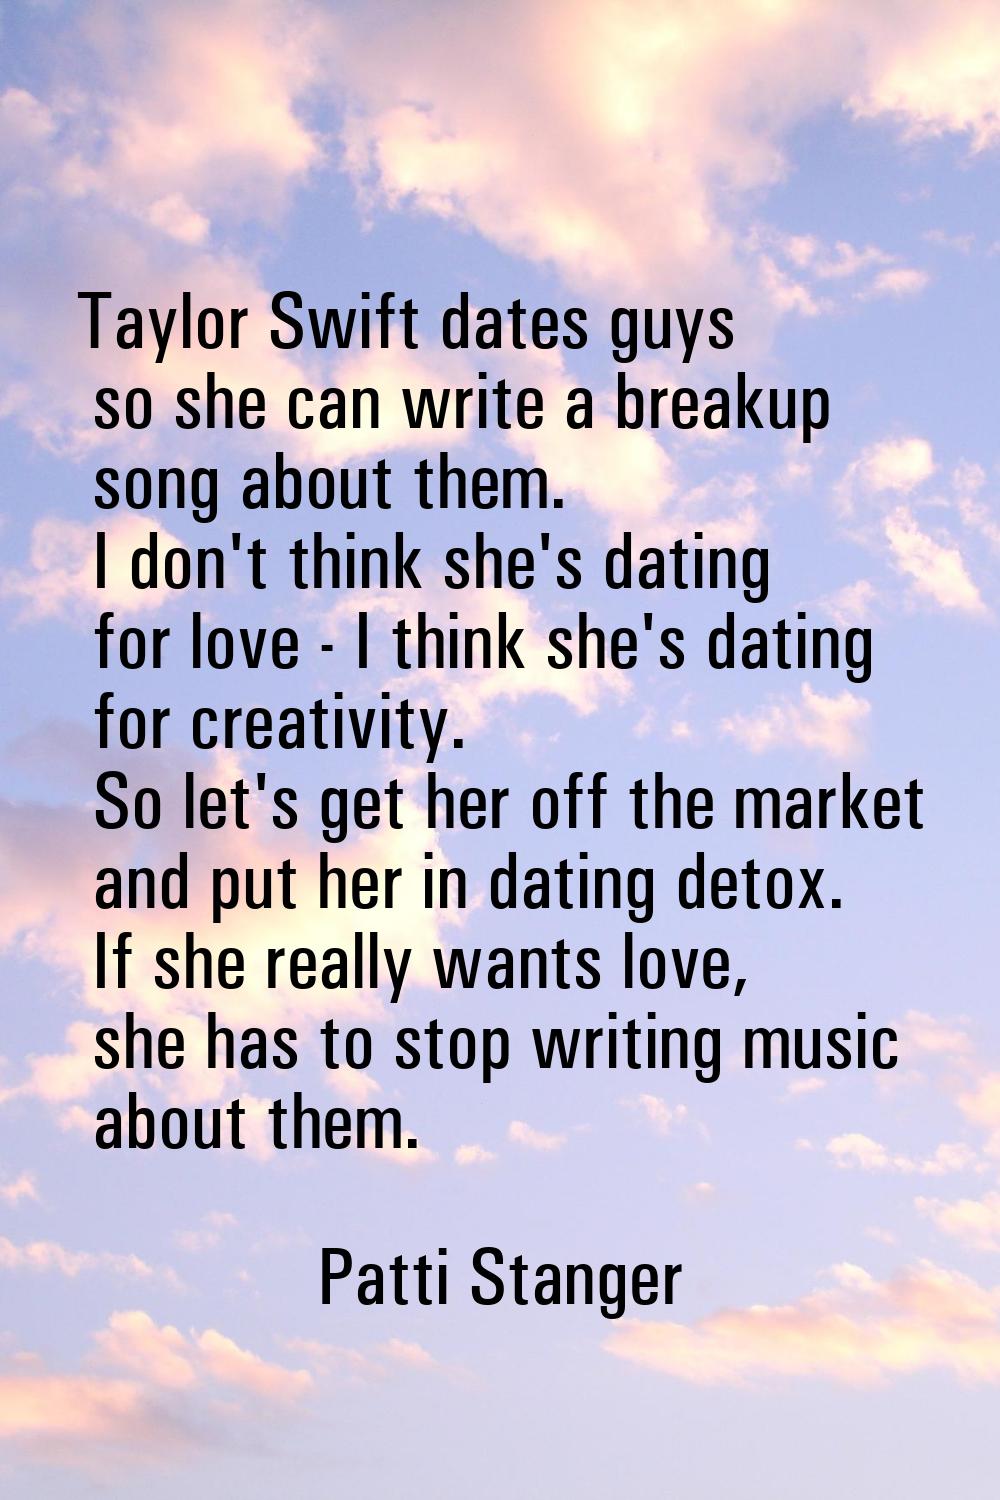 Taylor Swift dates guys so she can write a breakup song about them. I don't think she's dating for 